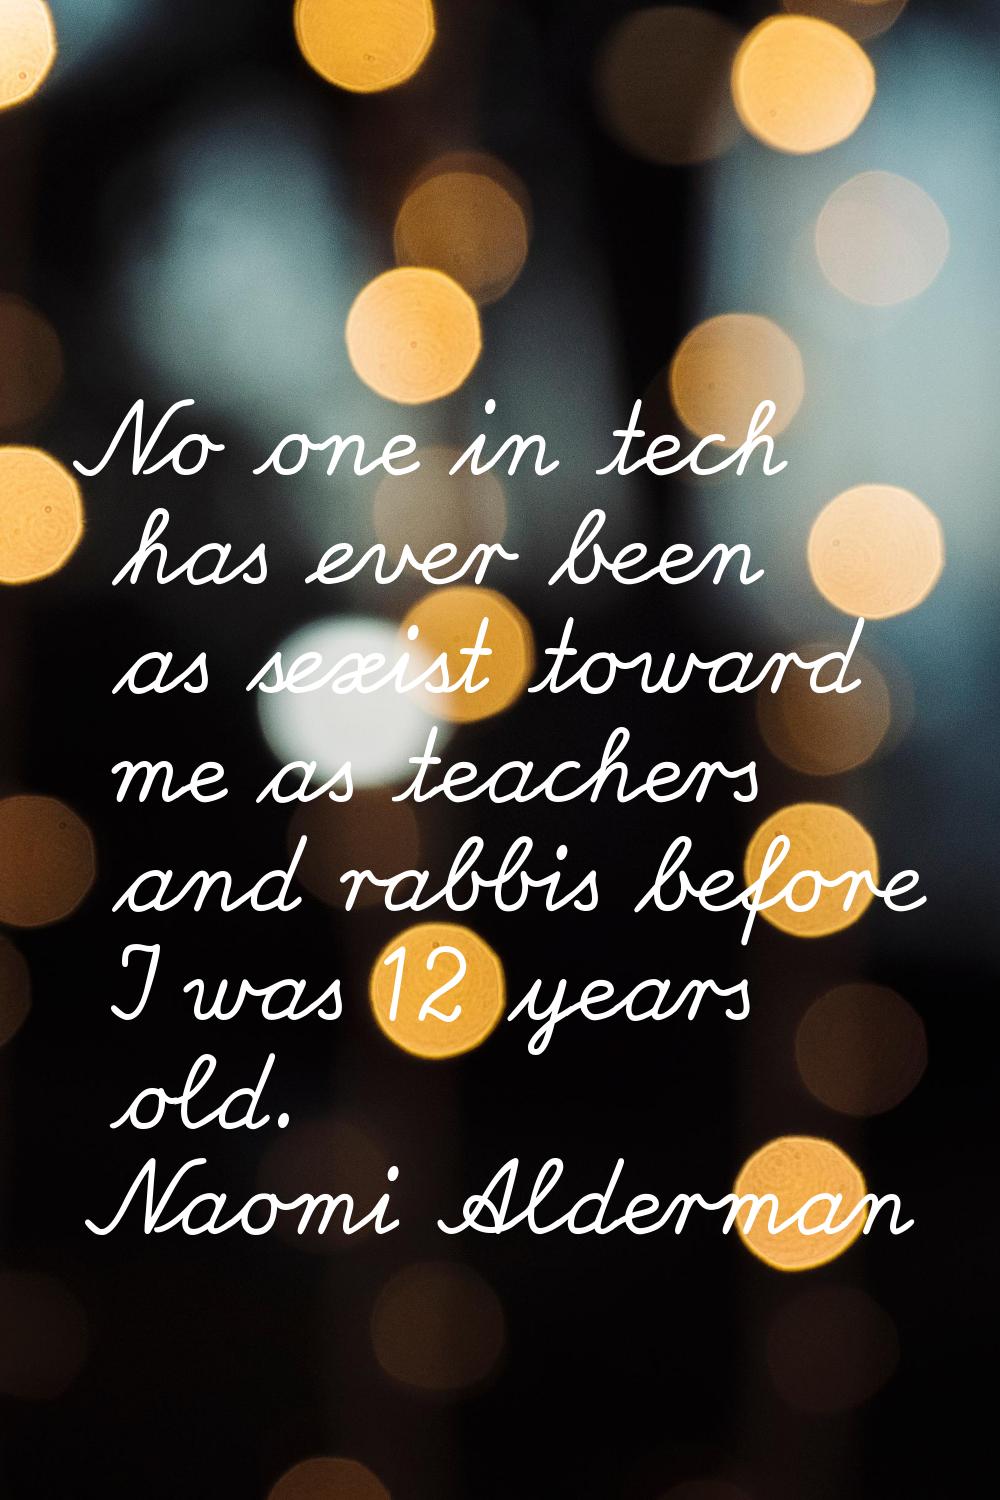 No one in tech has ever been as sexist toward me as teachers and rabbis before I was 12 years old.